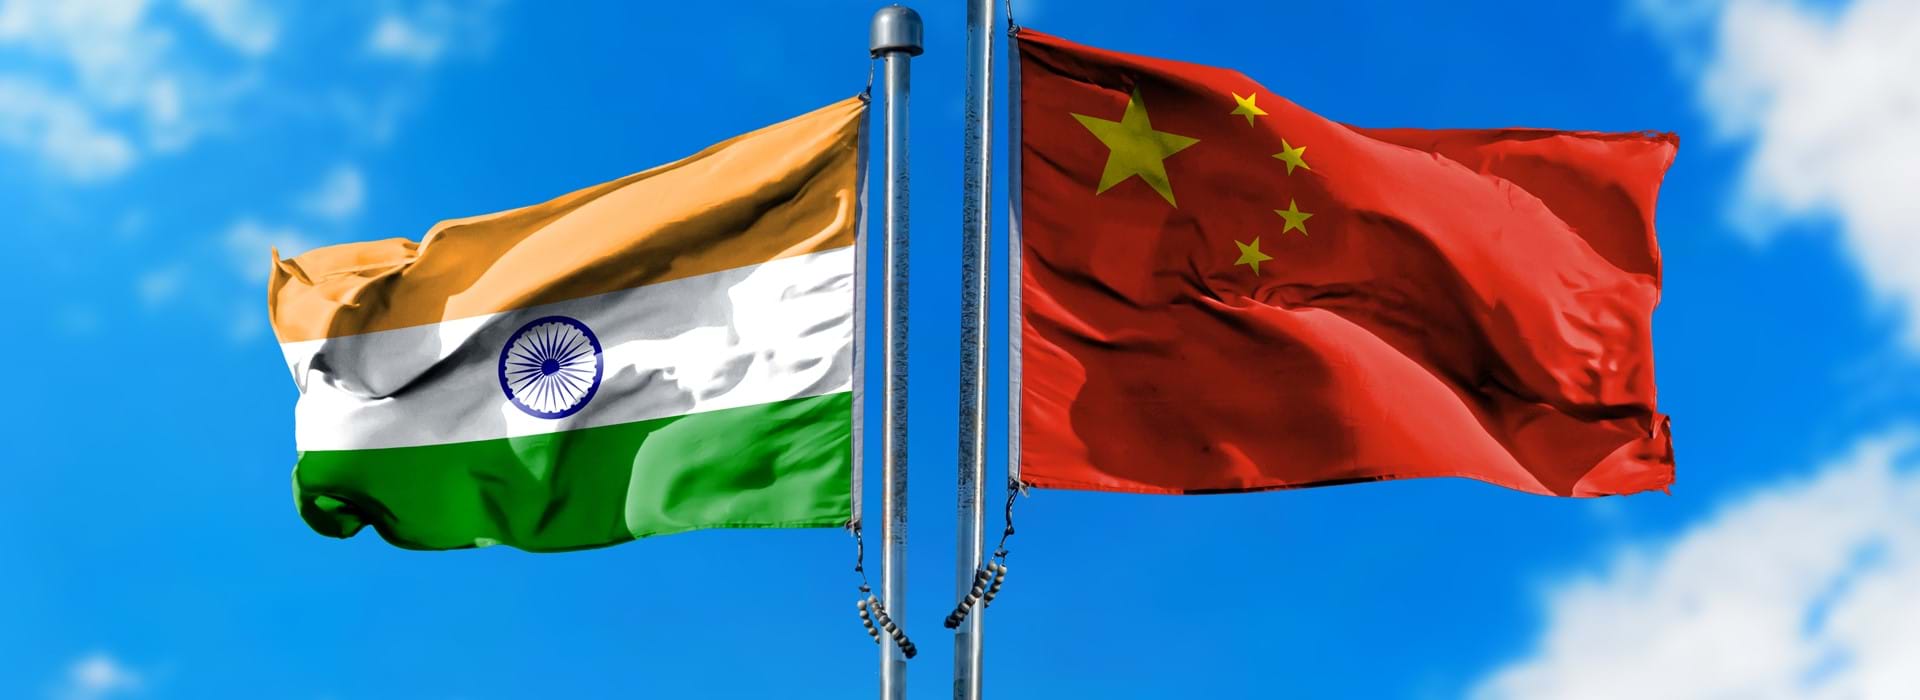 Is India becoming the new China?